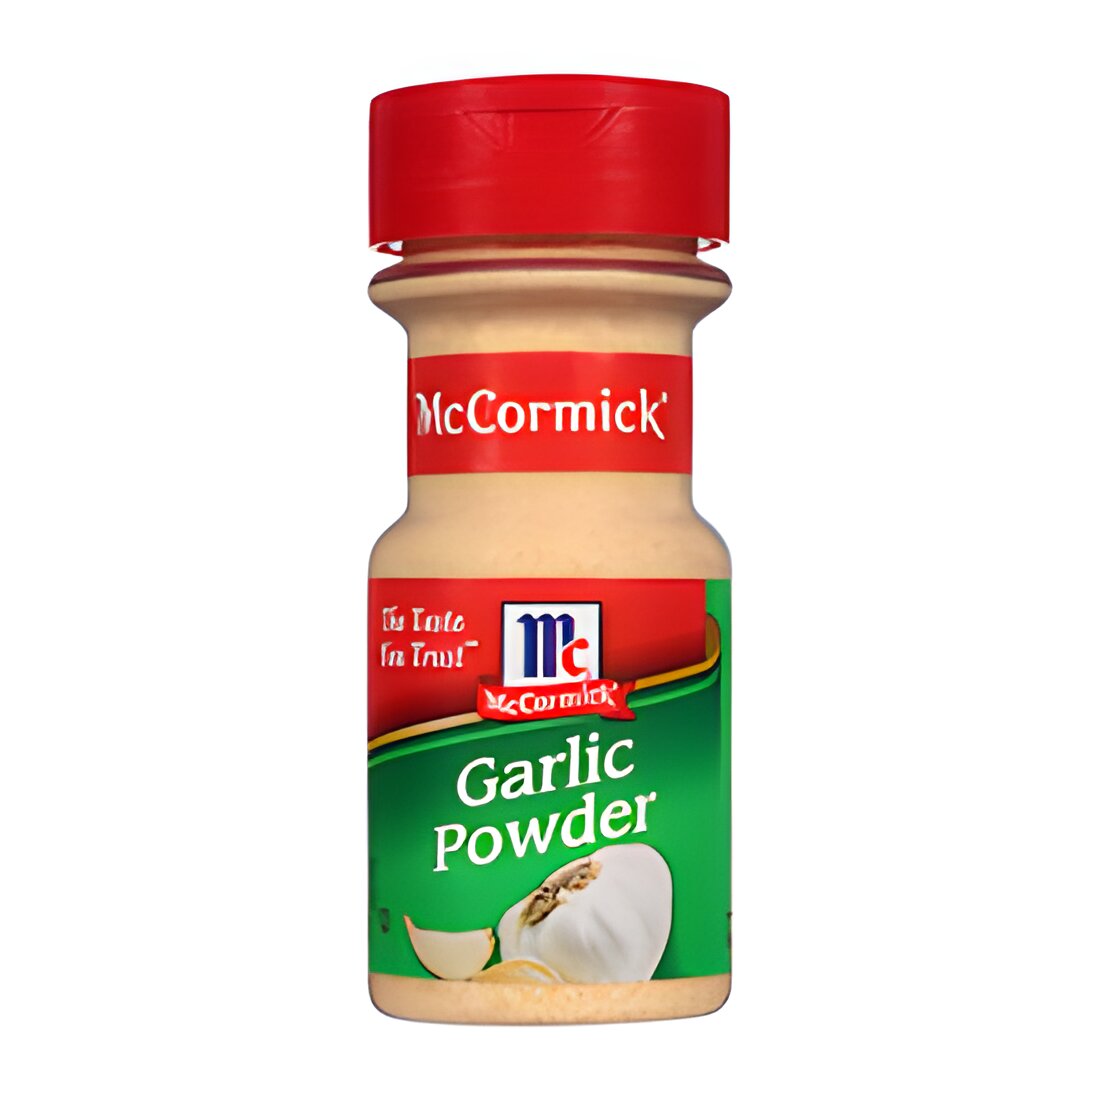 Free Food Samples For Mccormick Product Testers